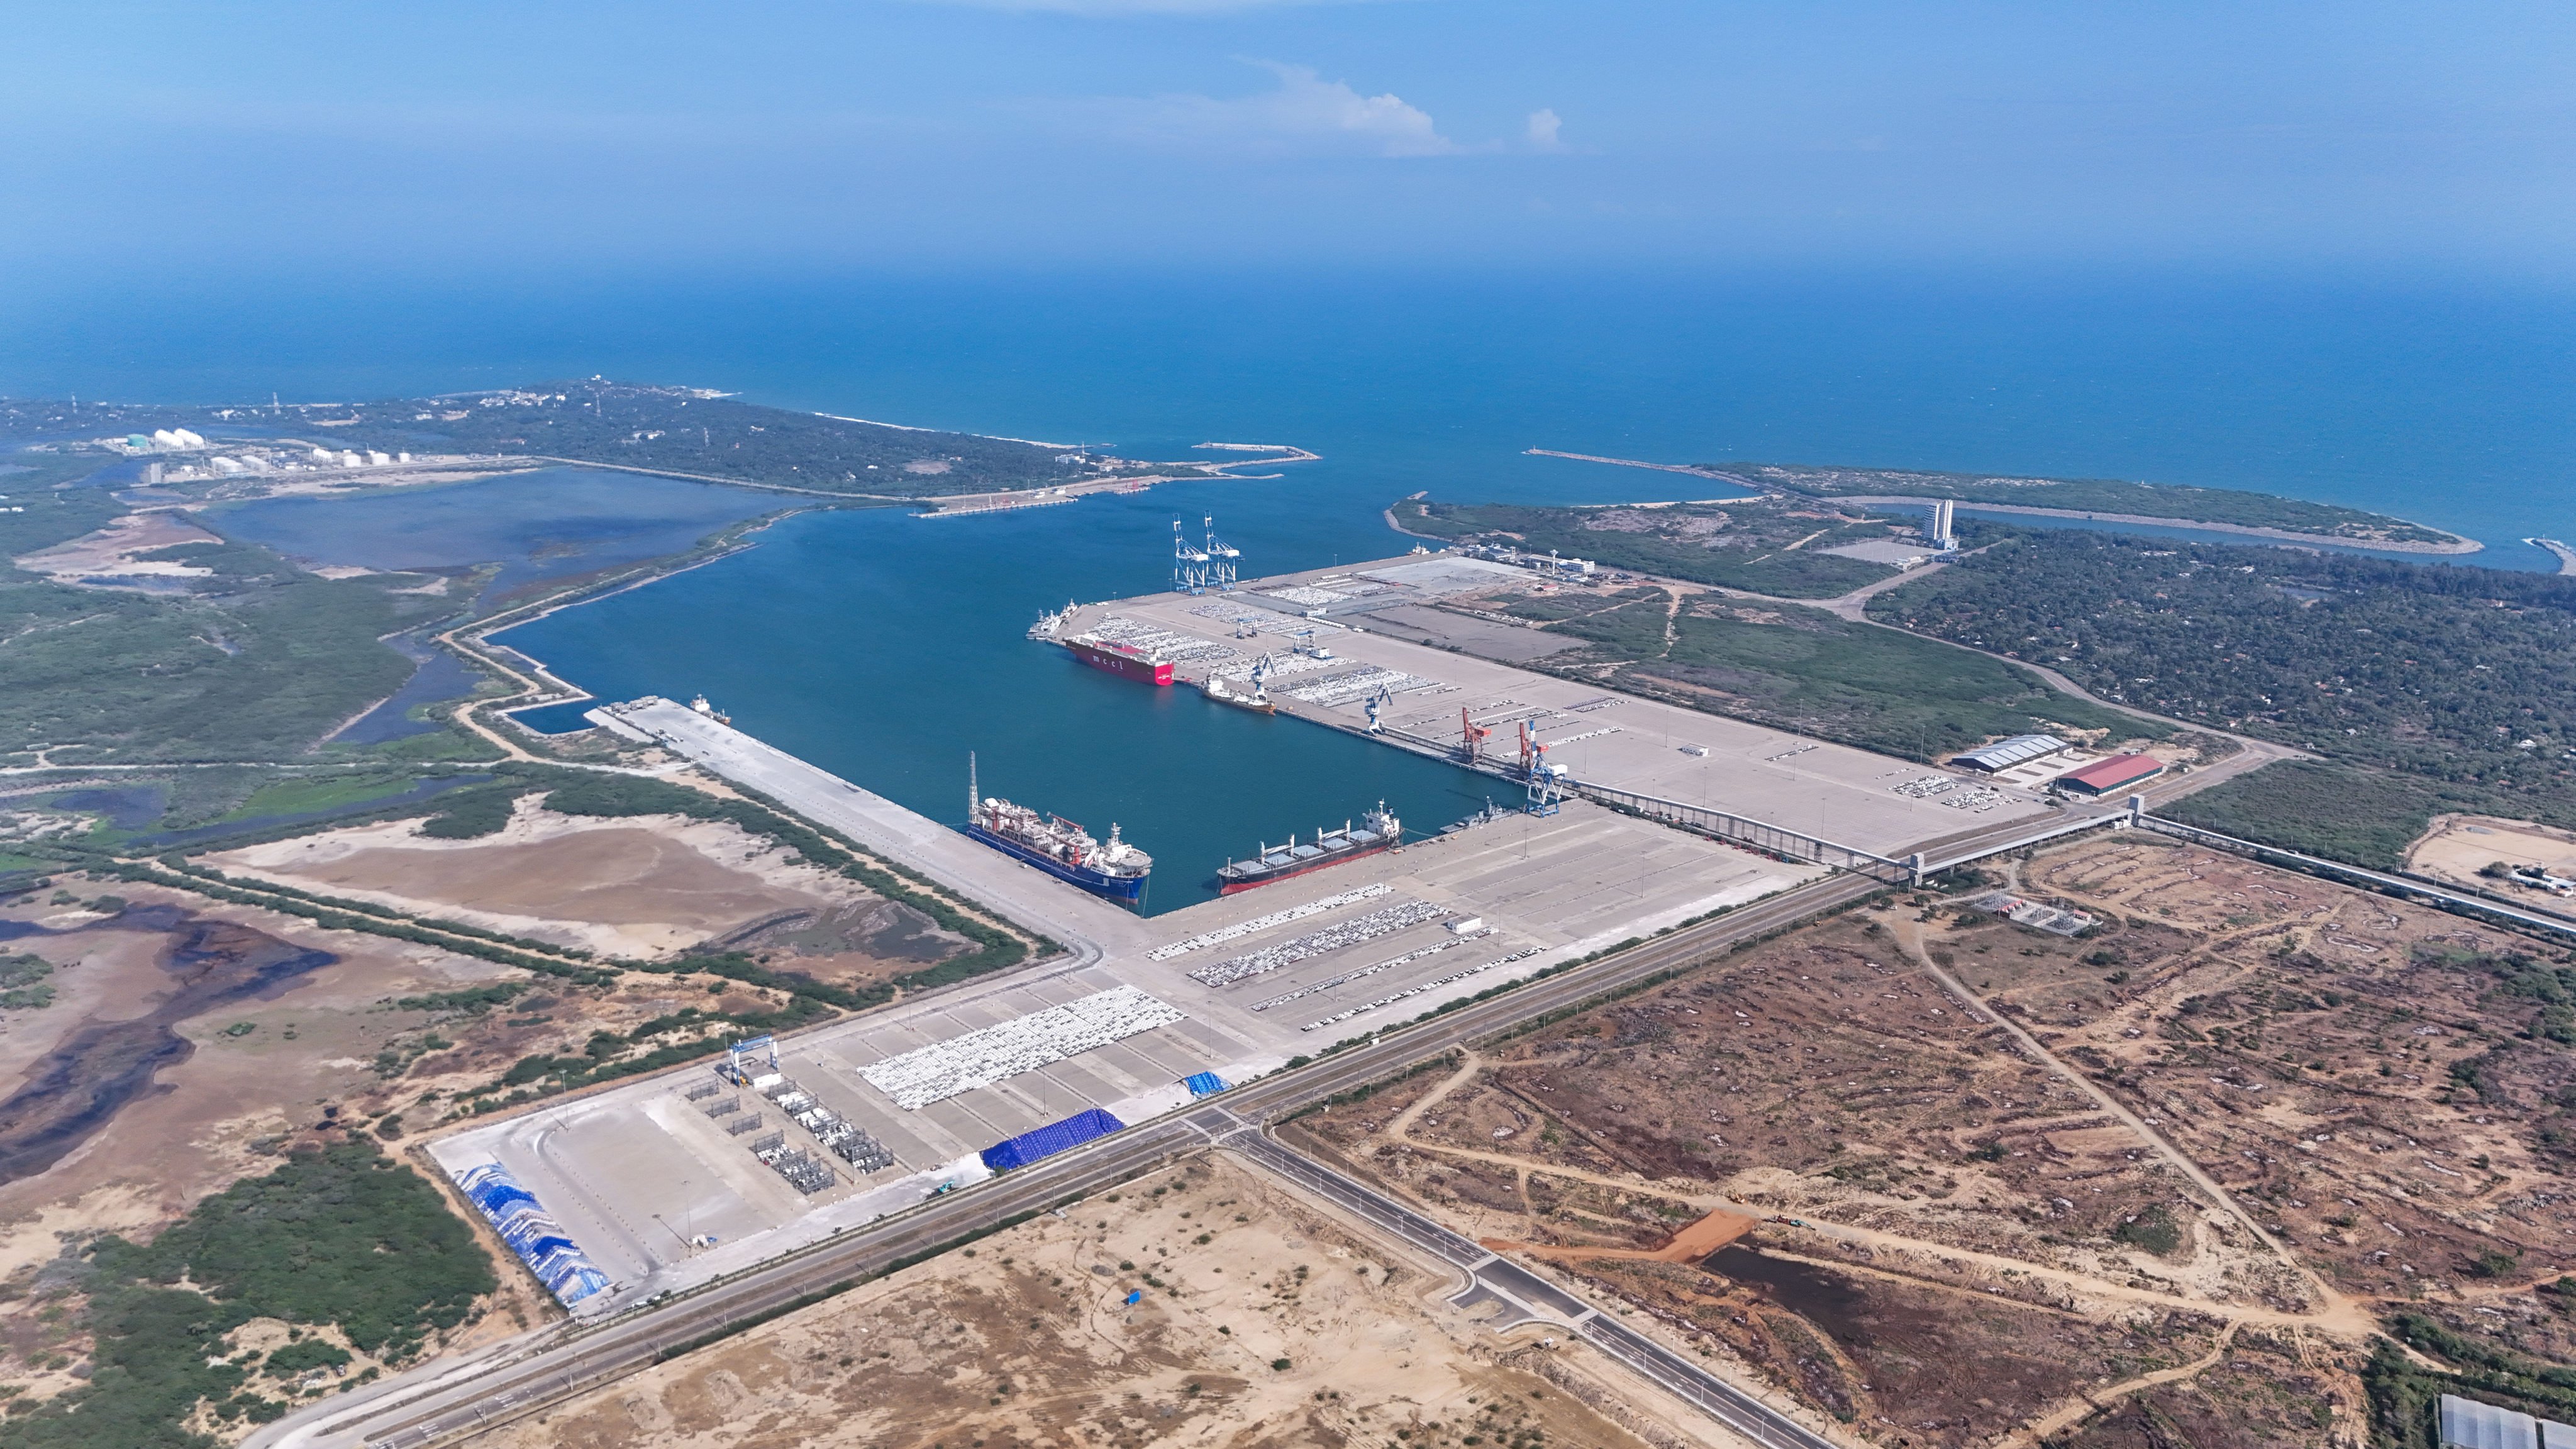 Located in the south of Sri Lanka, the Hambantota Port is one of the signature projects of Belt and Road cooperation between China and Sri Lanka. Photo: Xinhua